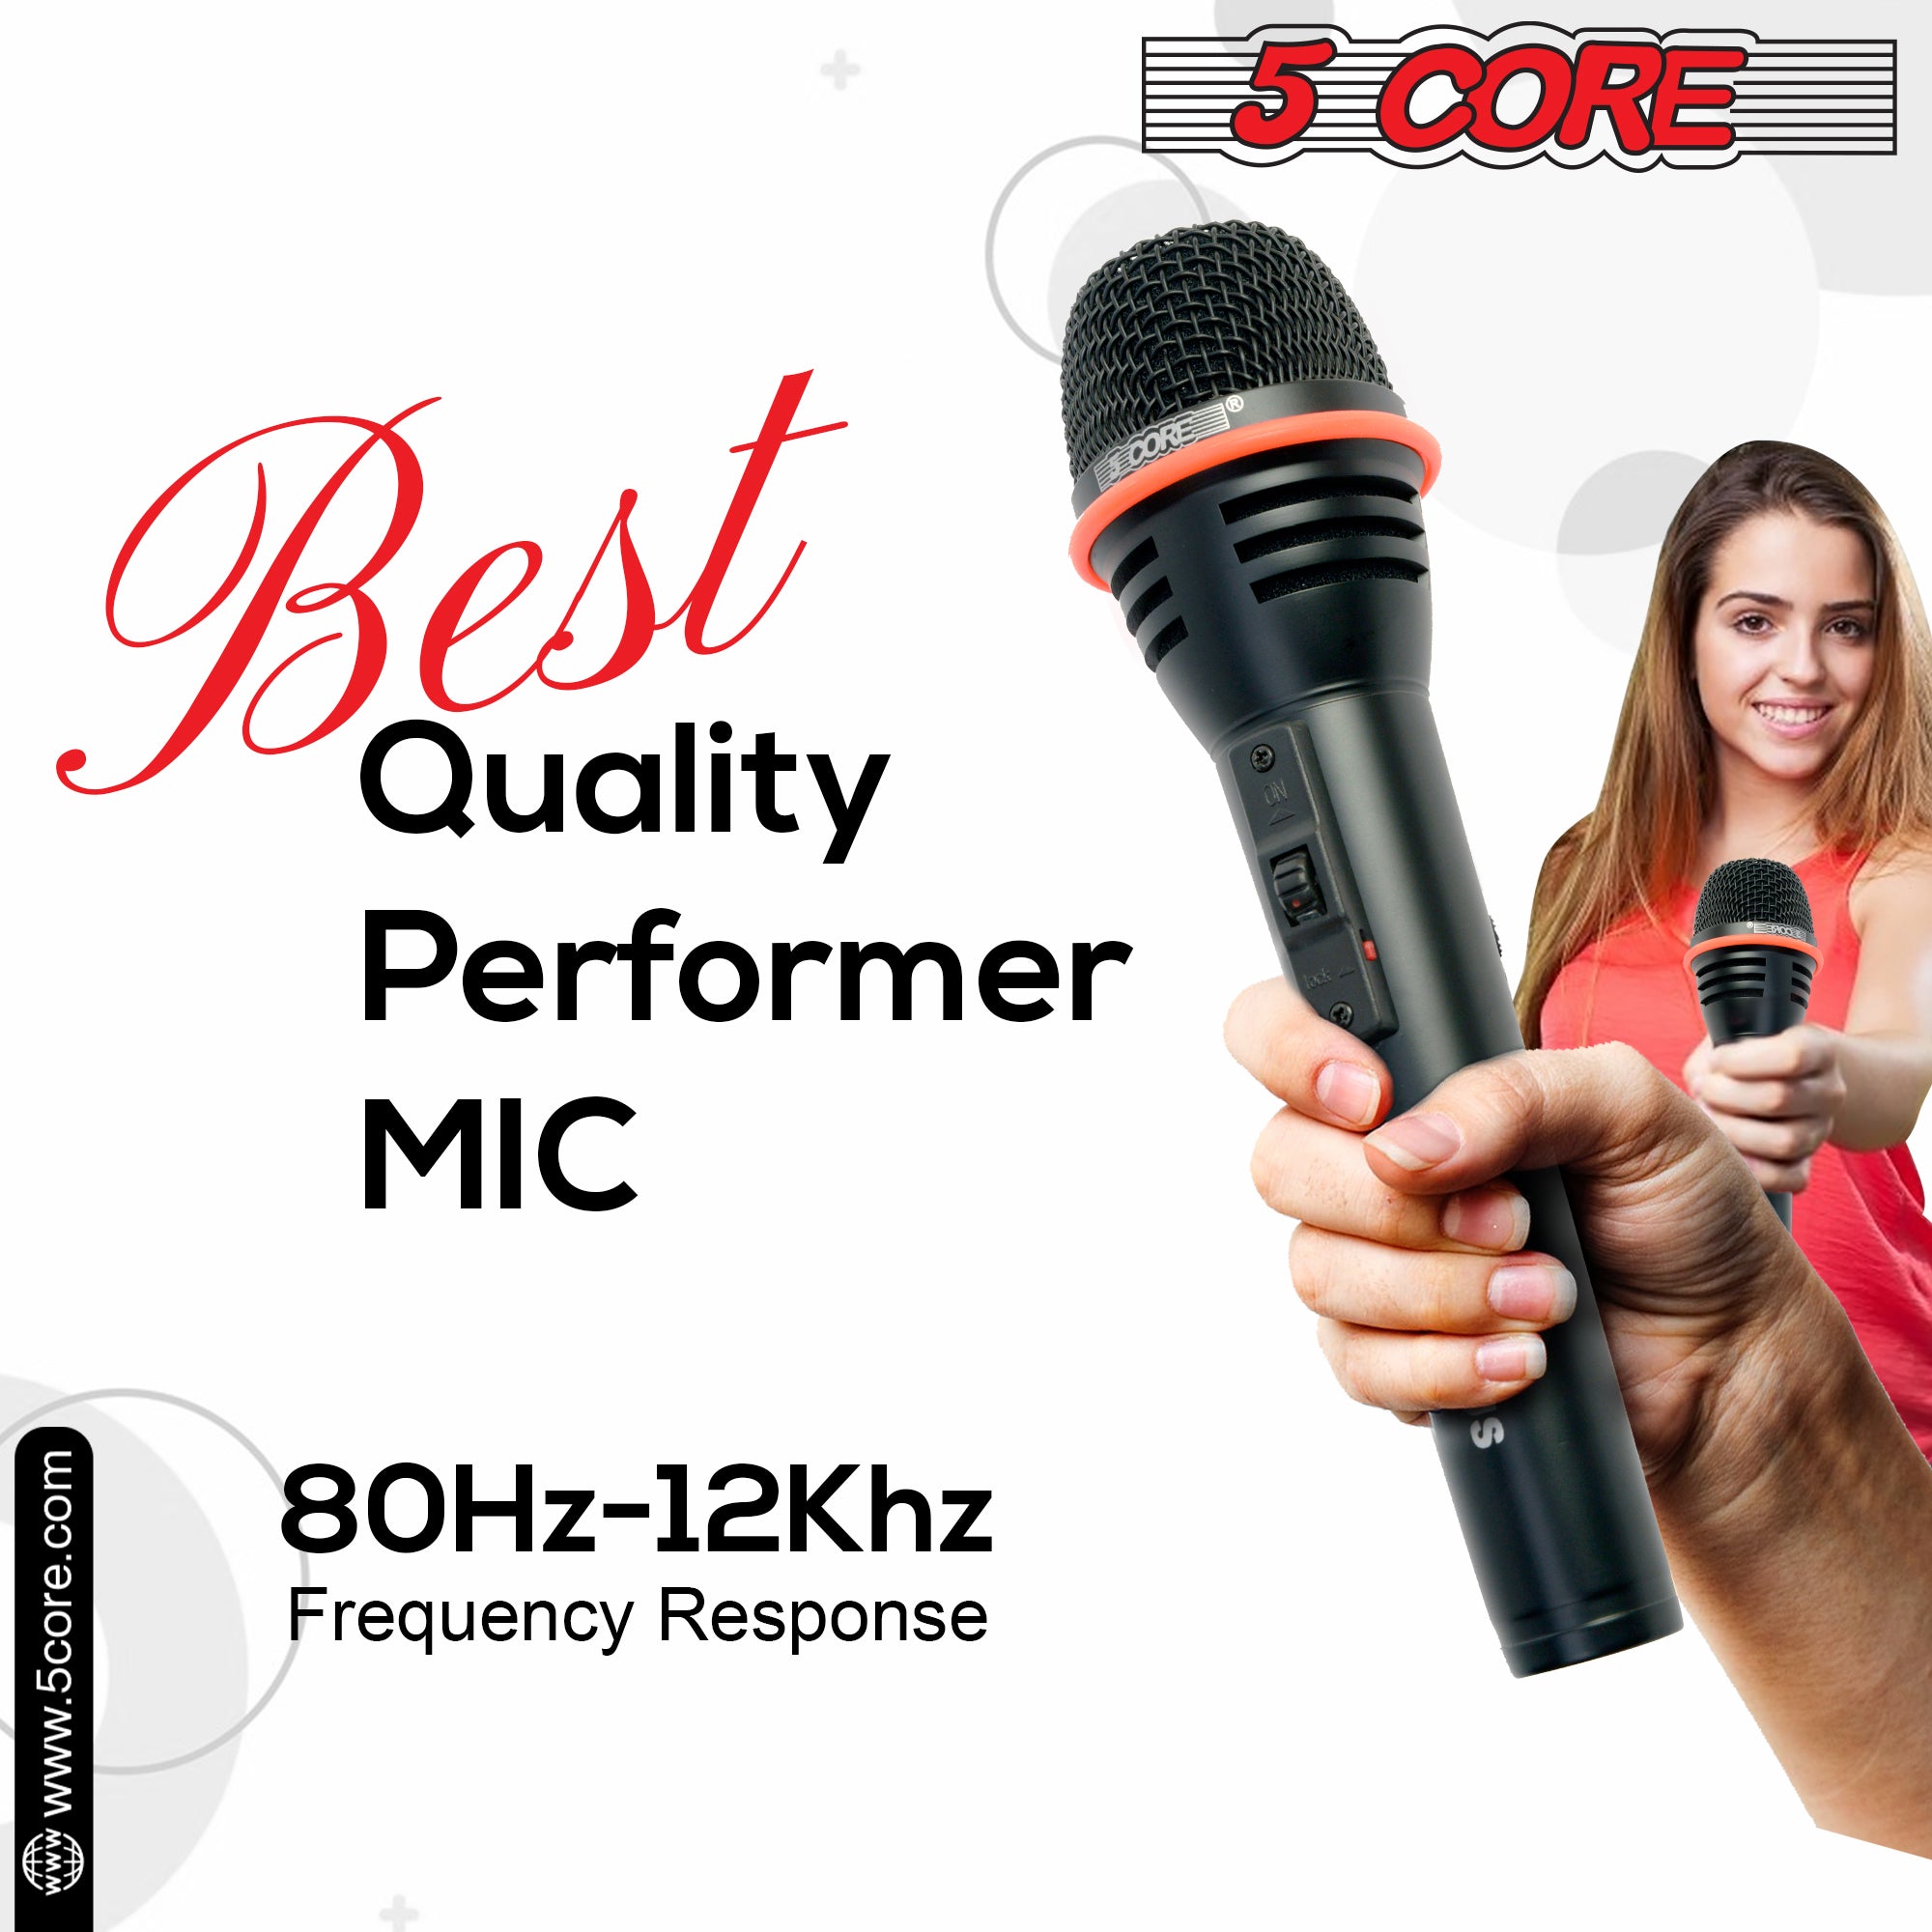 Professional Sound Quality: Experience the Difference